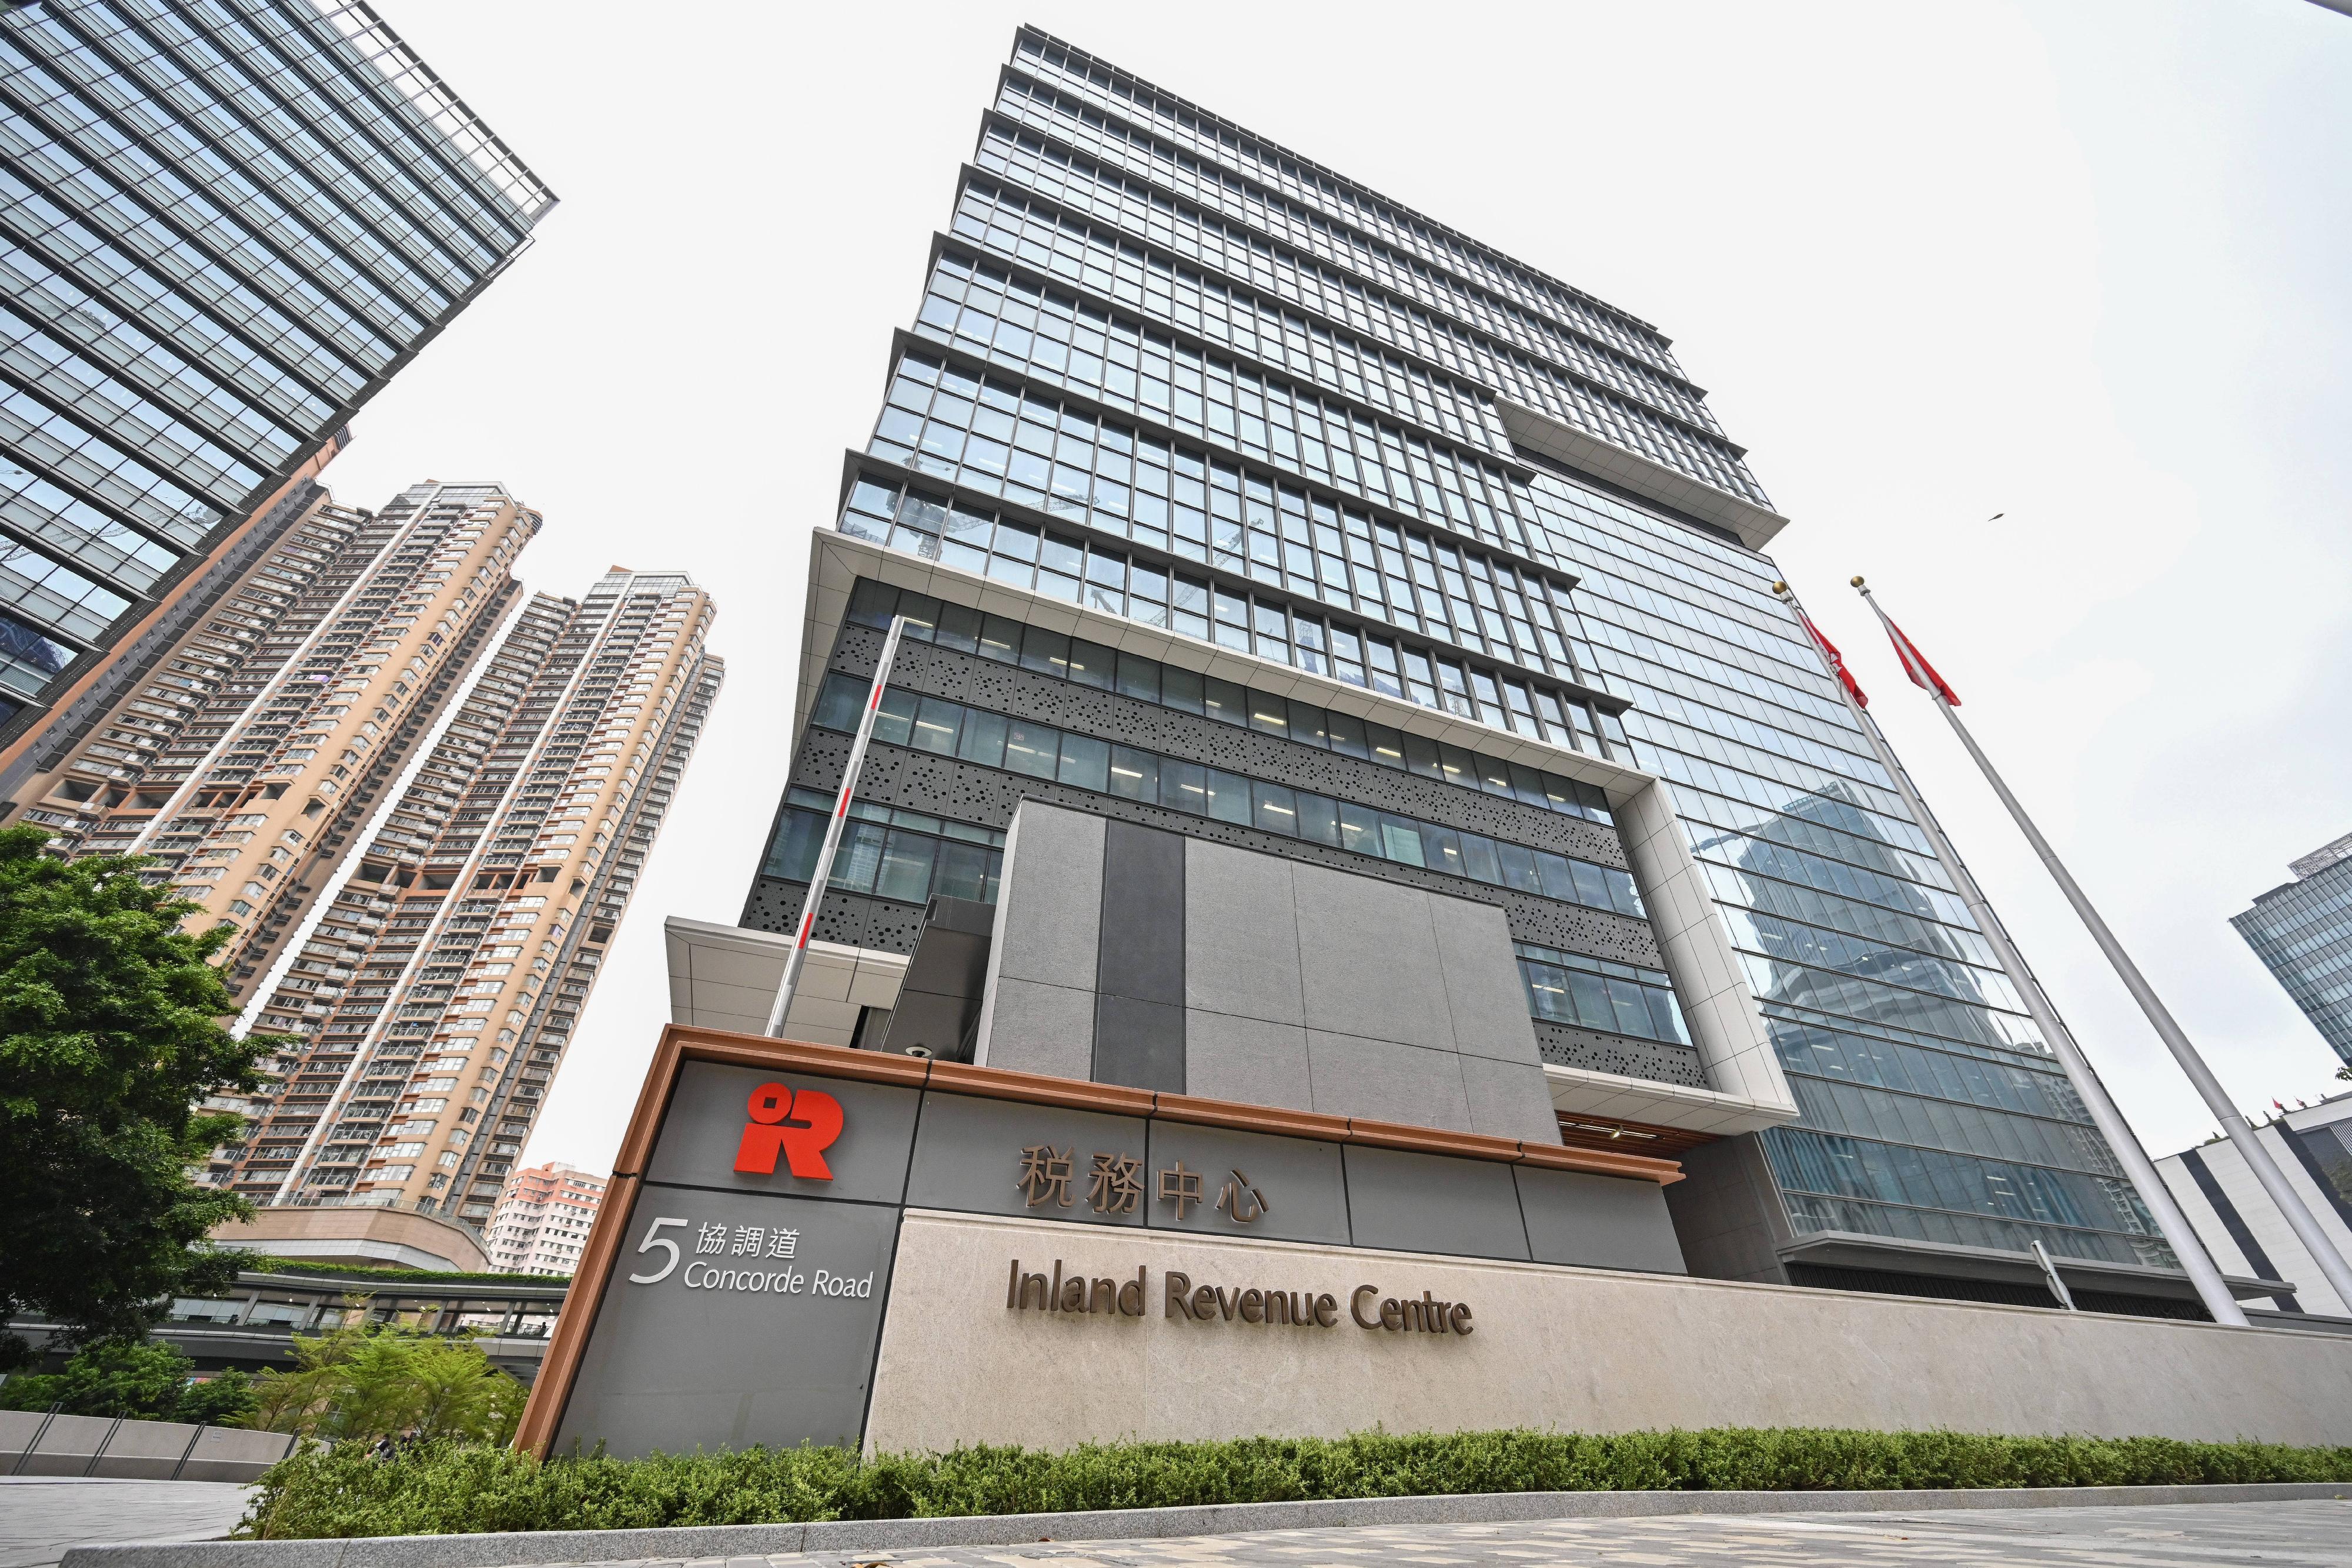 Located in the Kai Tak Development Area at 5 Concorde Road, the Inland Revenue Centre is a new dedicated office building for the Inland Revenue Department.